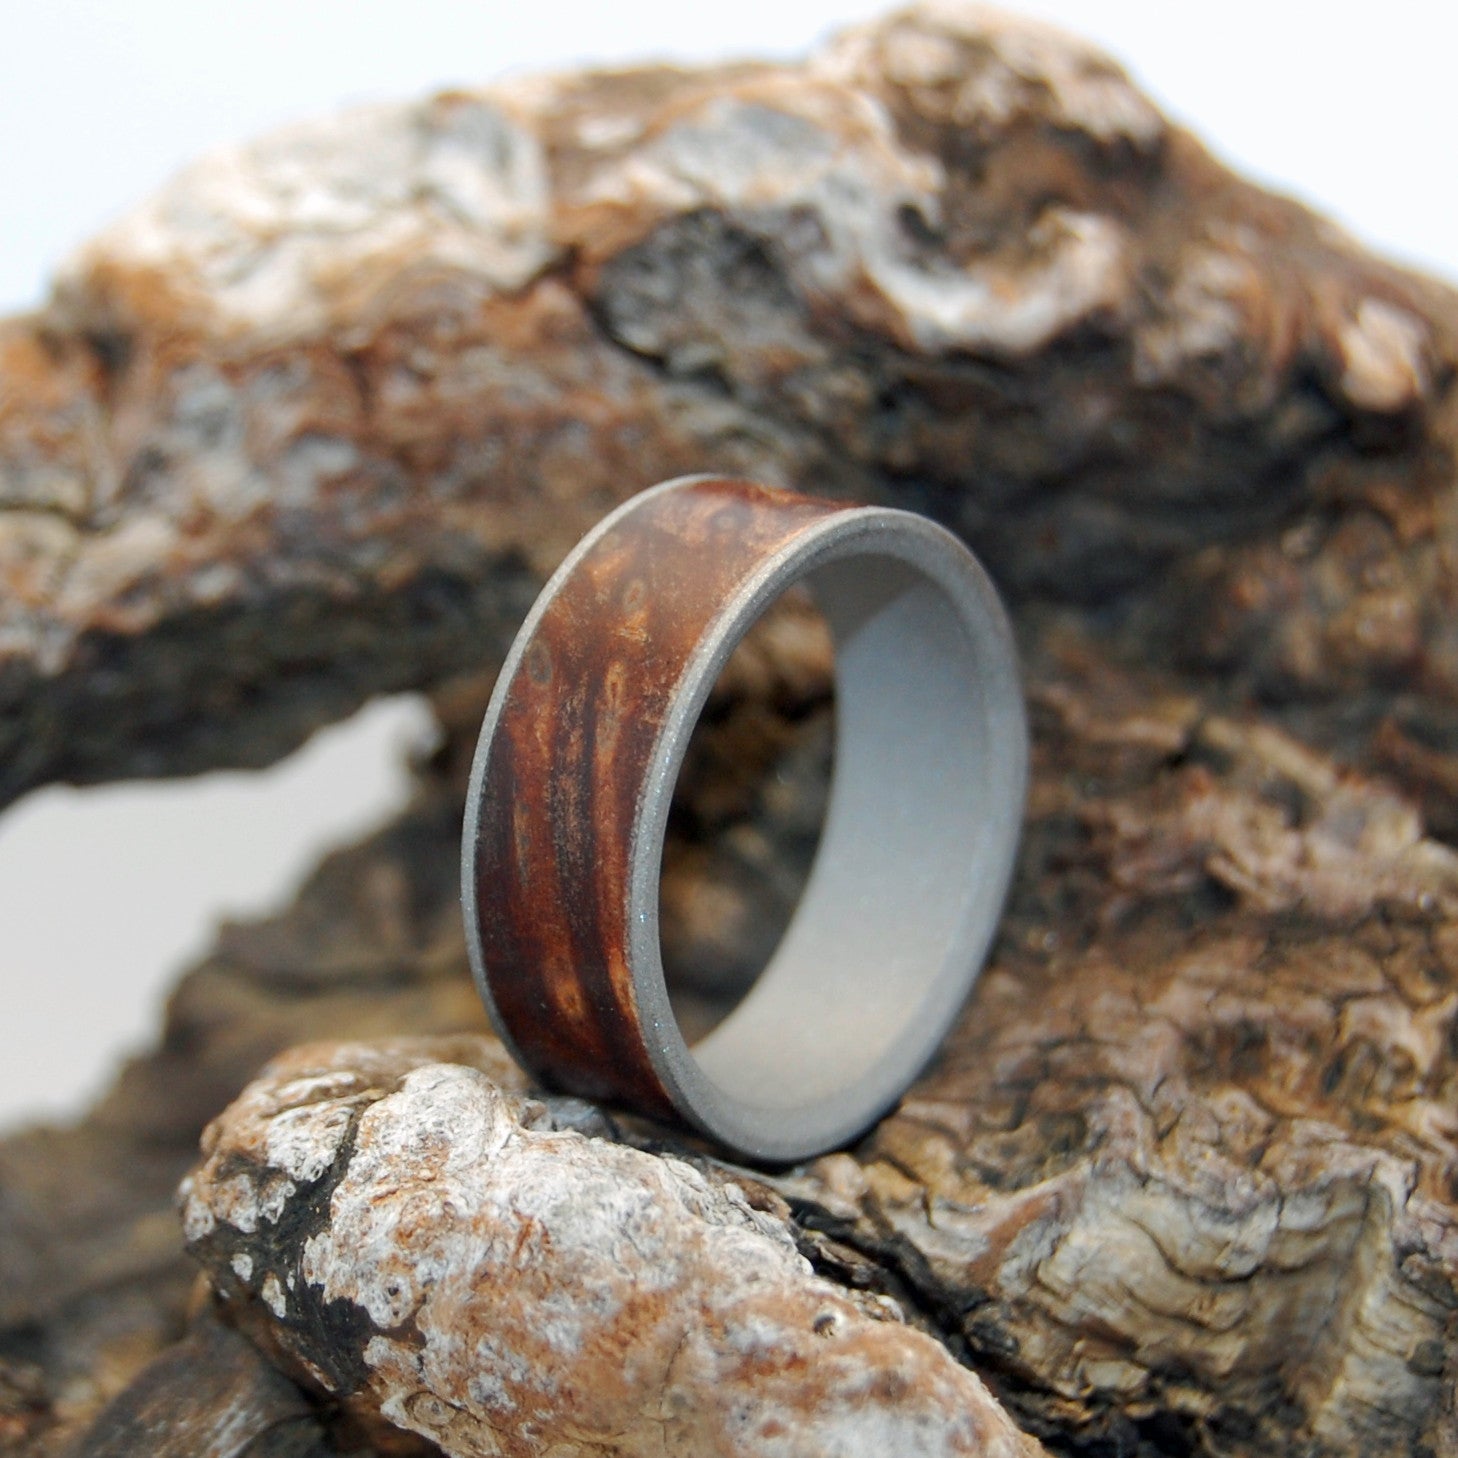 Mens Ring - Redwood Burl - Titanium Wedding Ring | MIGHTY ONE - Minter and Richter Designs